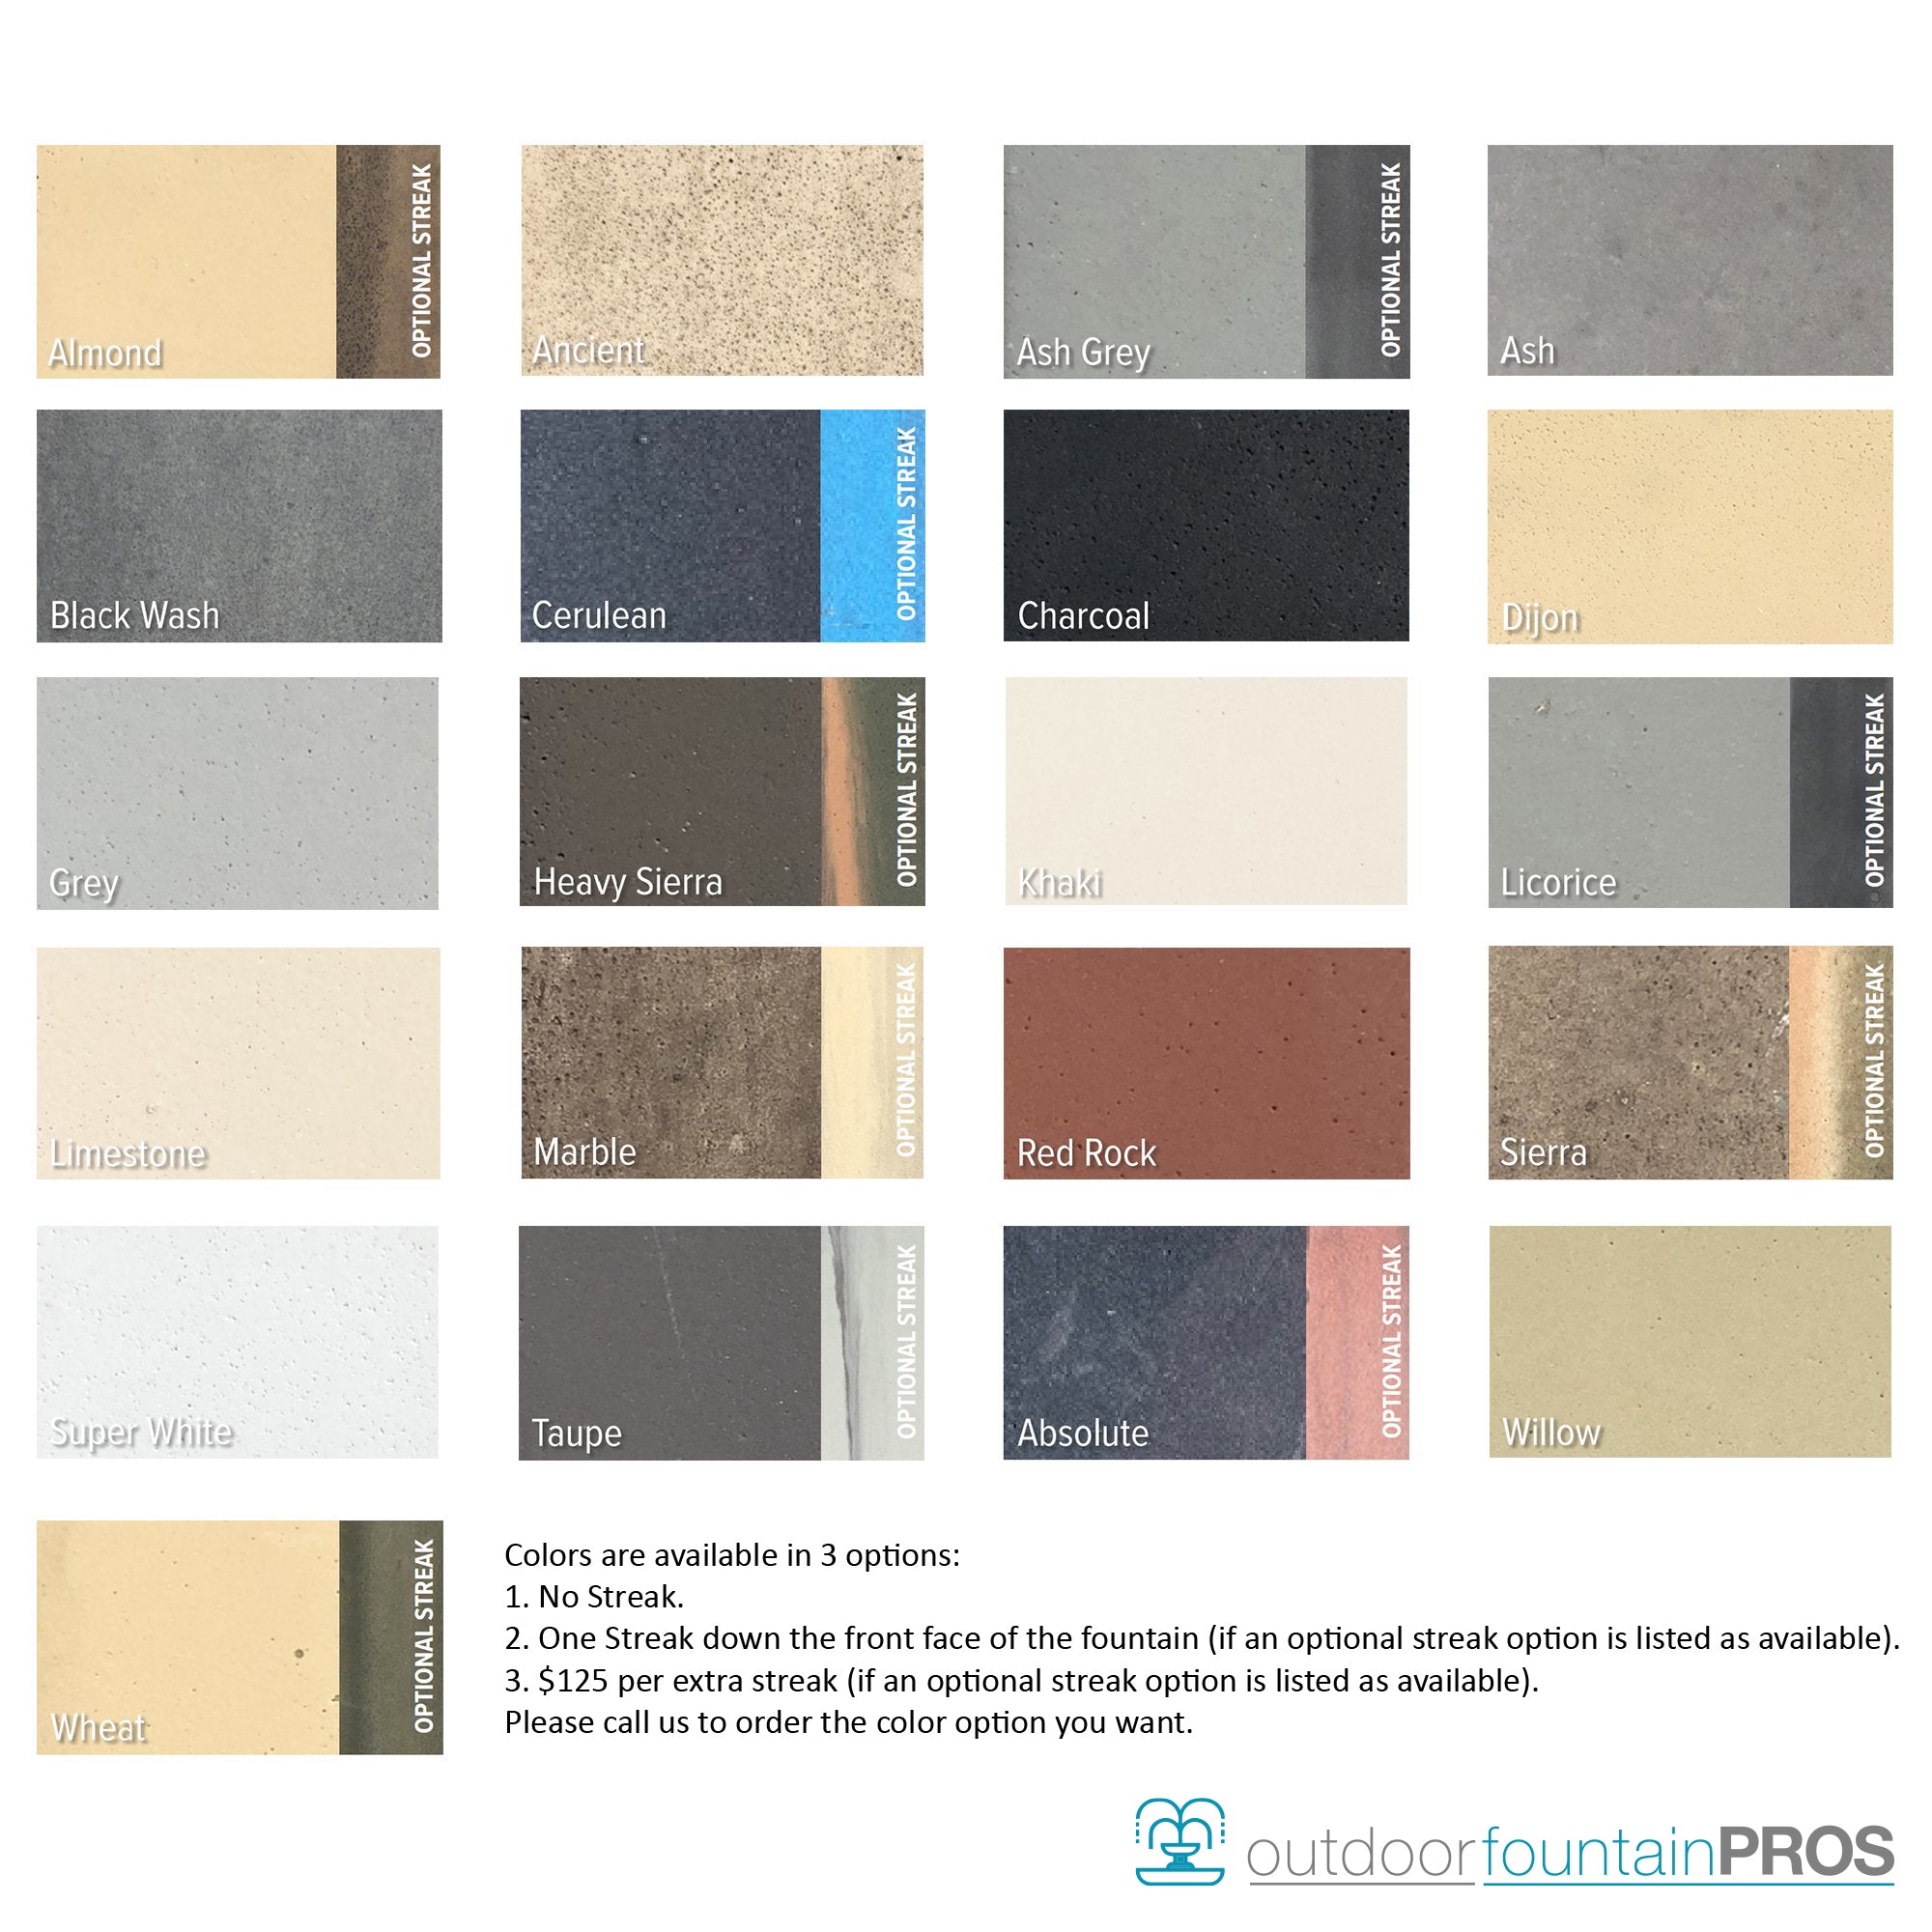 GIST Colors - Outdoor Fountain Pros'